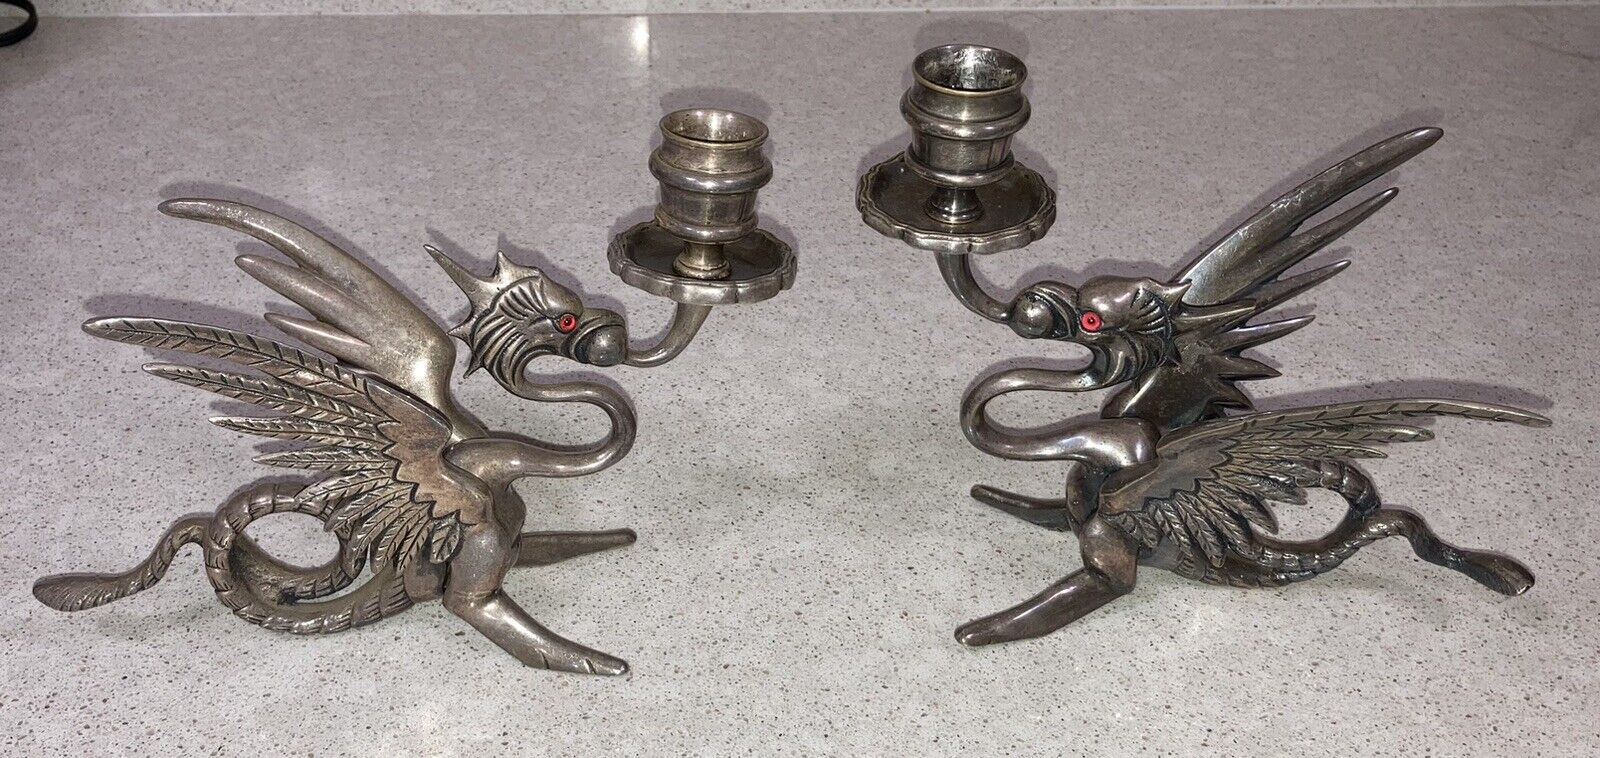 SET OF 2 HEAVY METAL BRASS? DRAGON CANDLESTICK HOLDERS - RED EYES